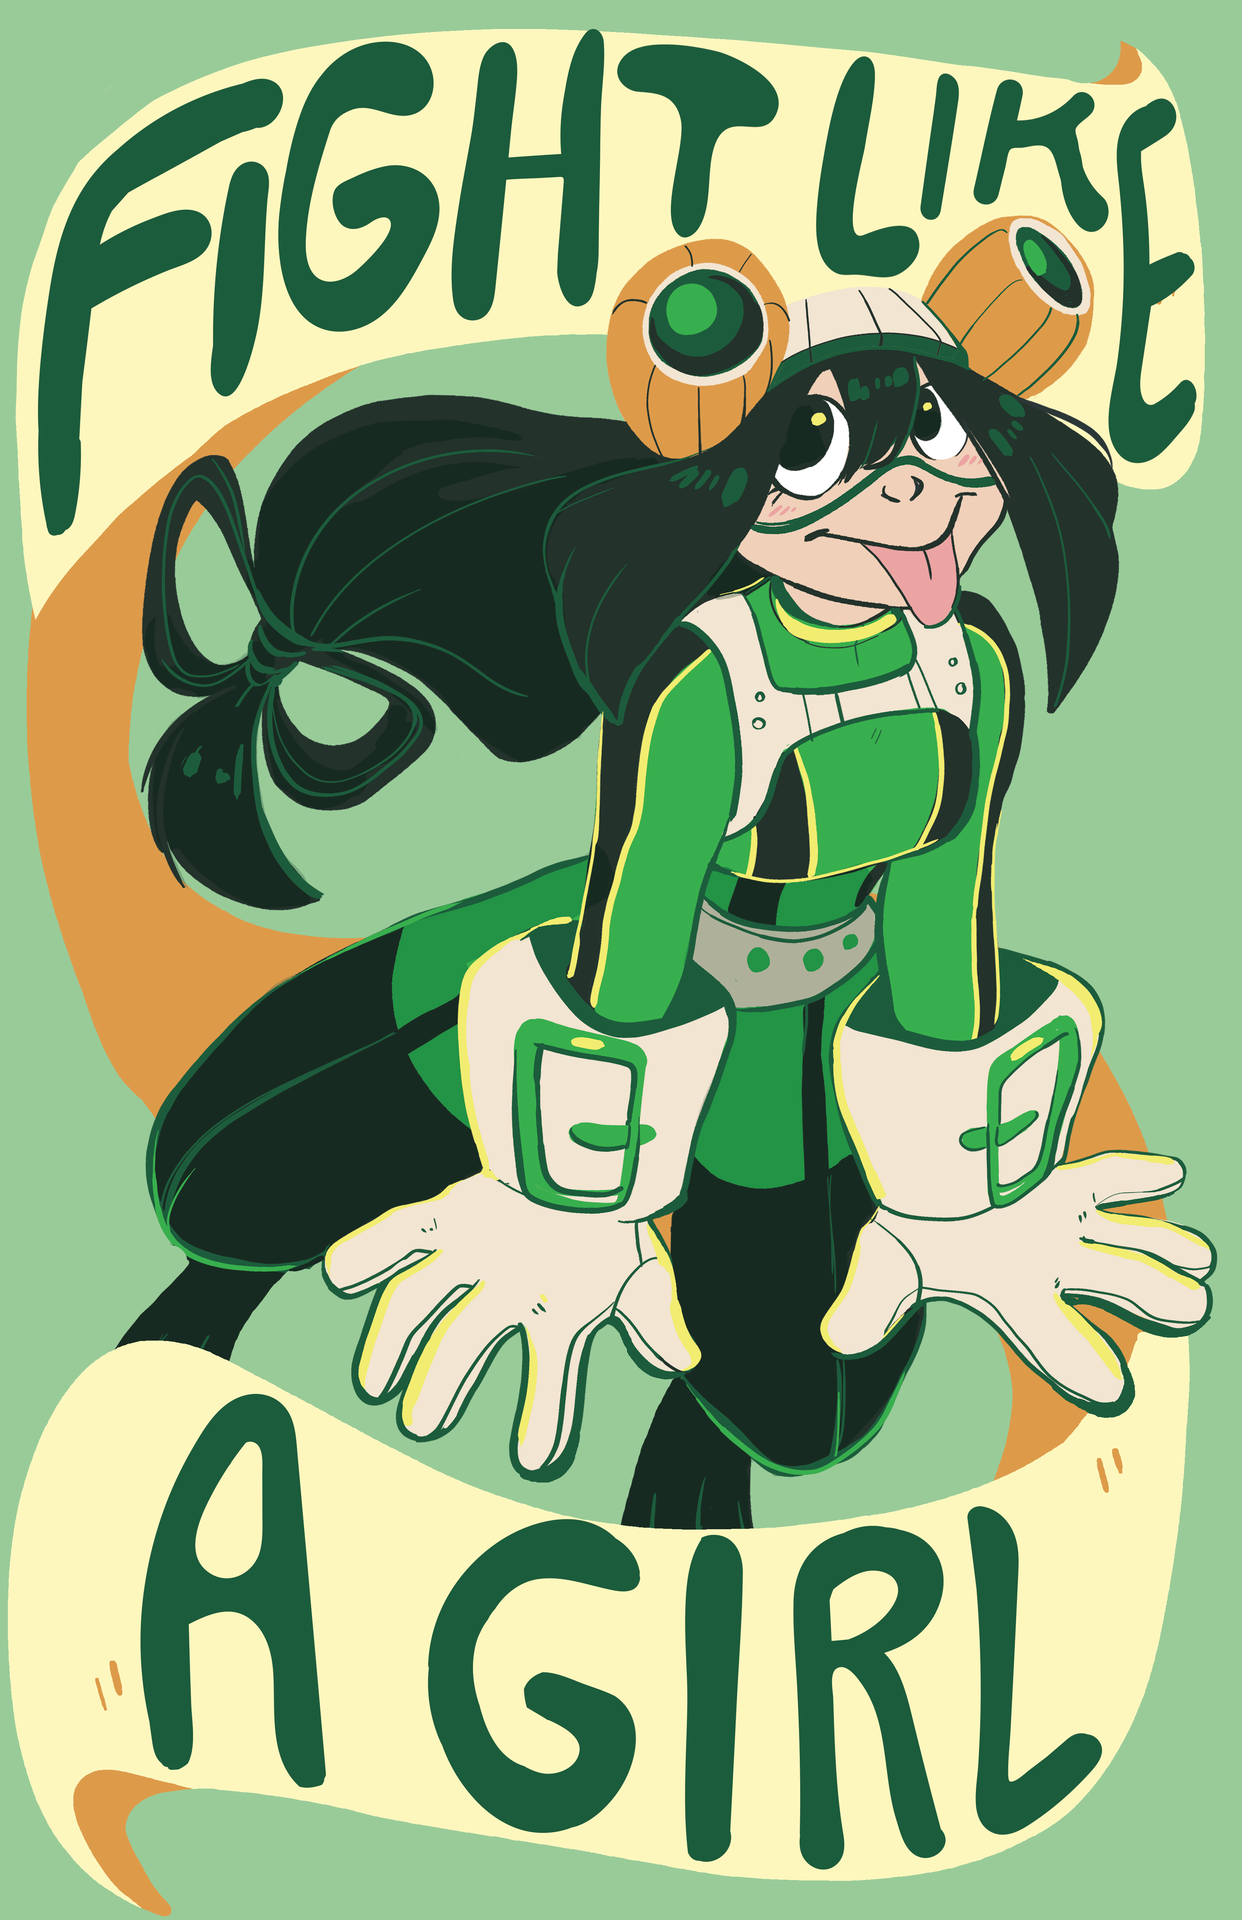 annalookhuman: So excited for season 3!! Here’s a Froppy to celebrate! This design